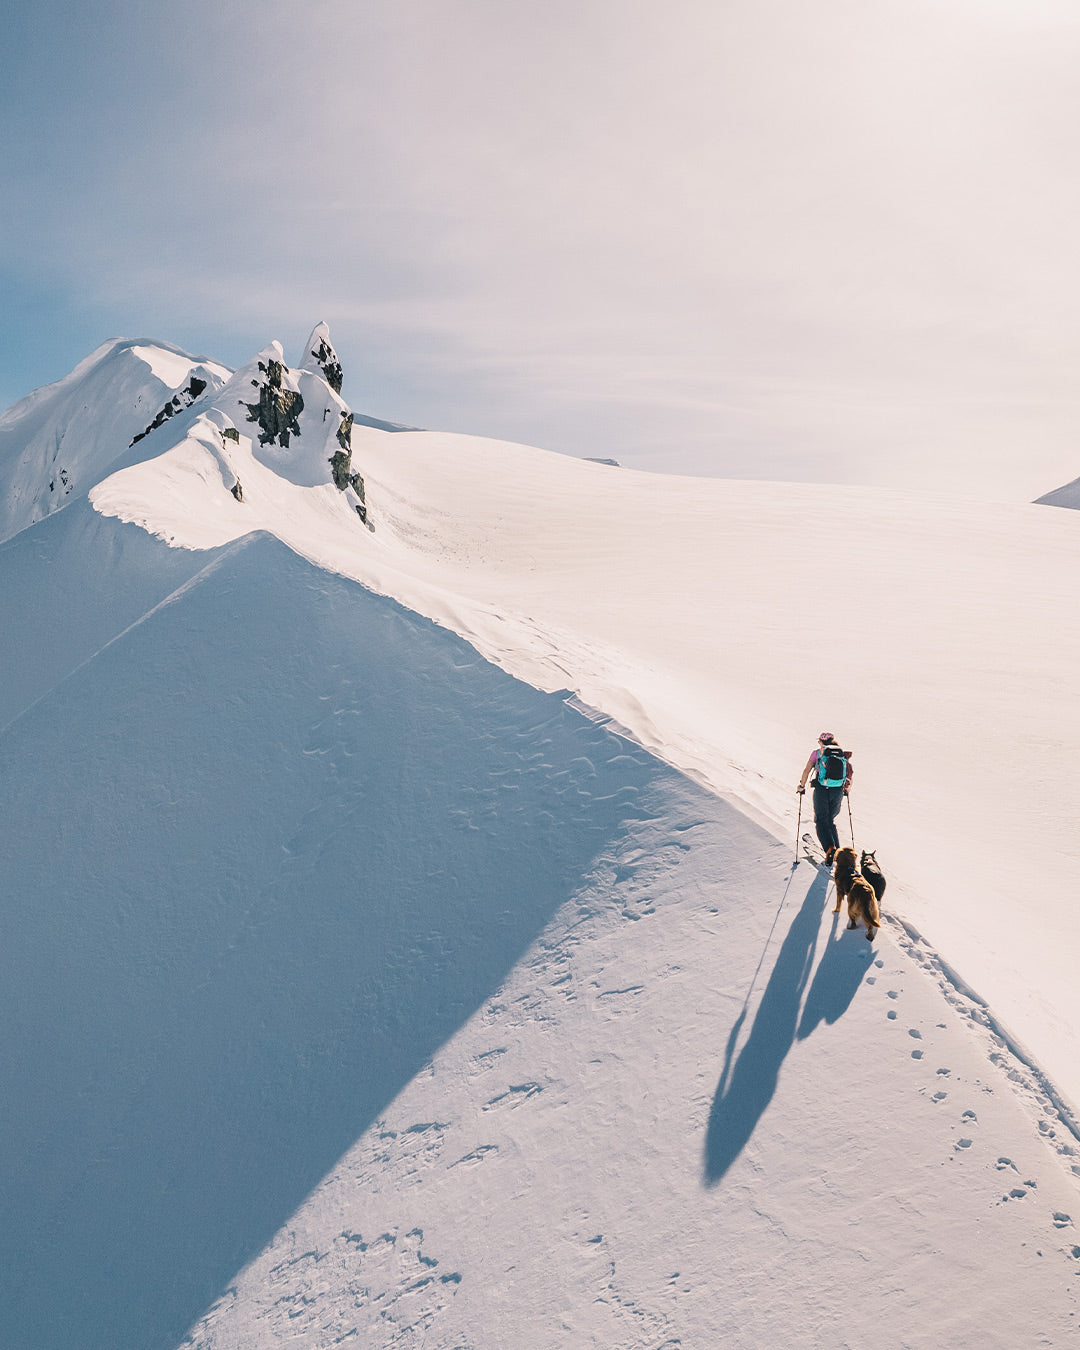 Woman on a ridge in yukon backcountry skiing with 2 dogs